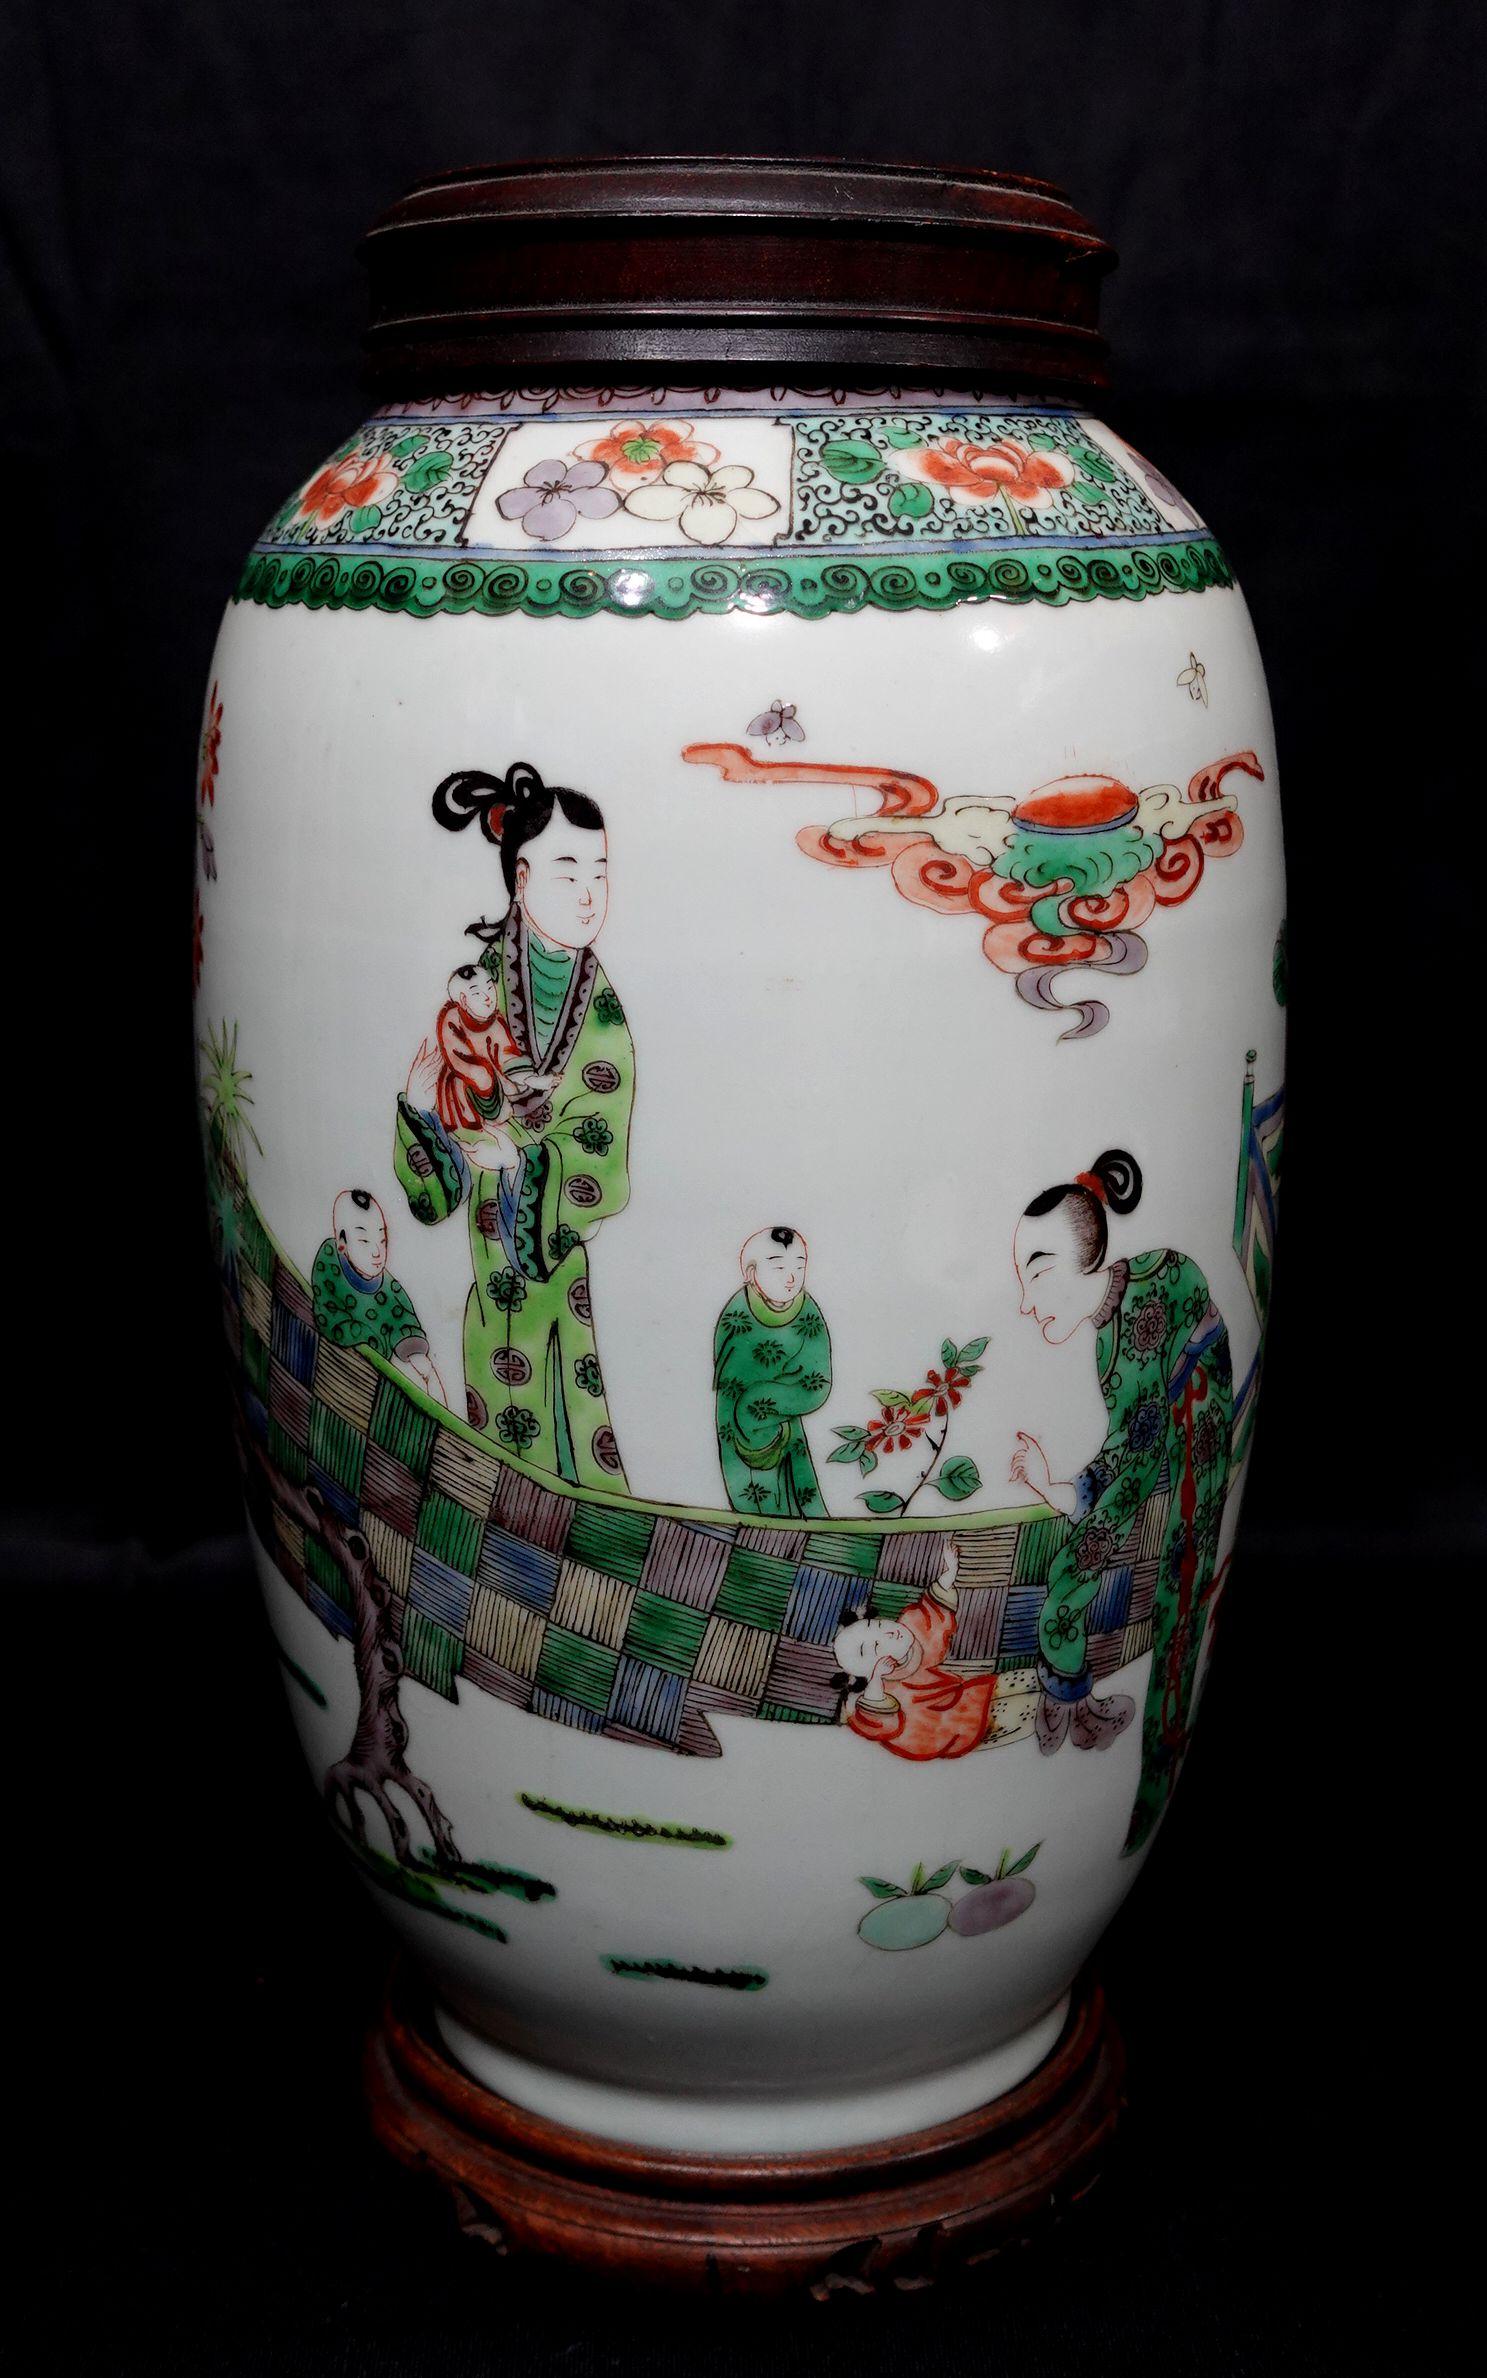 Famille verte vase. China. 19th century. Decoration of women and children. Truncated. Wooden cover and stand included.
7